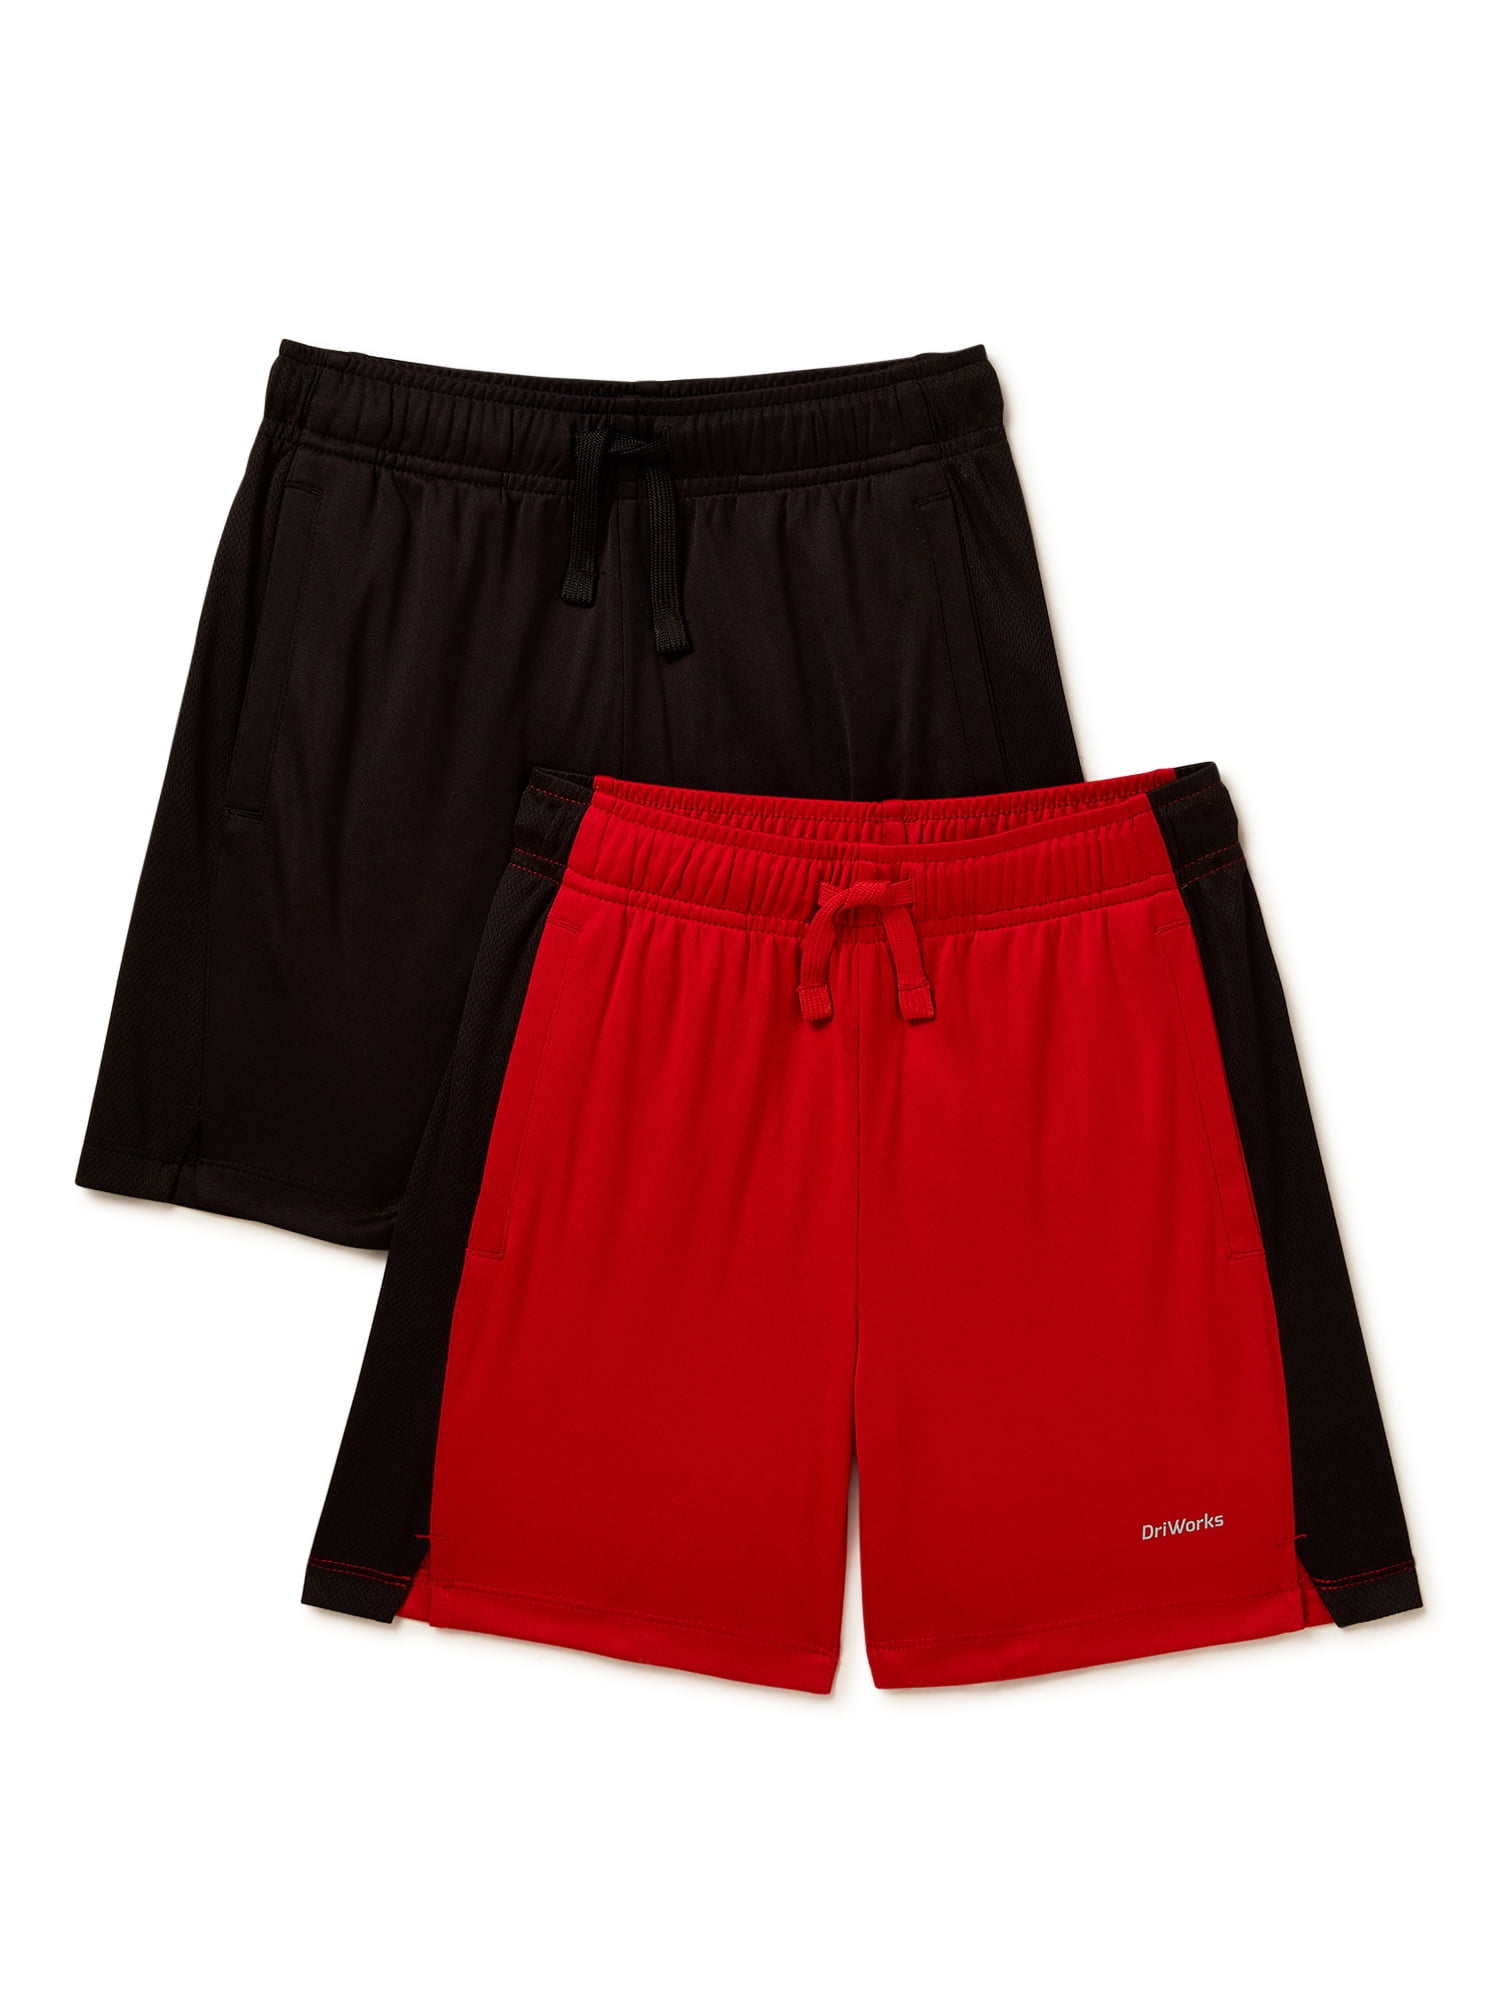 Athletic Works Boys Solid Shorts, 2-Pack, Sizes 4-18 & Husky